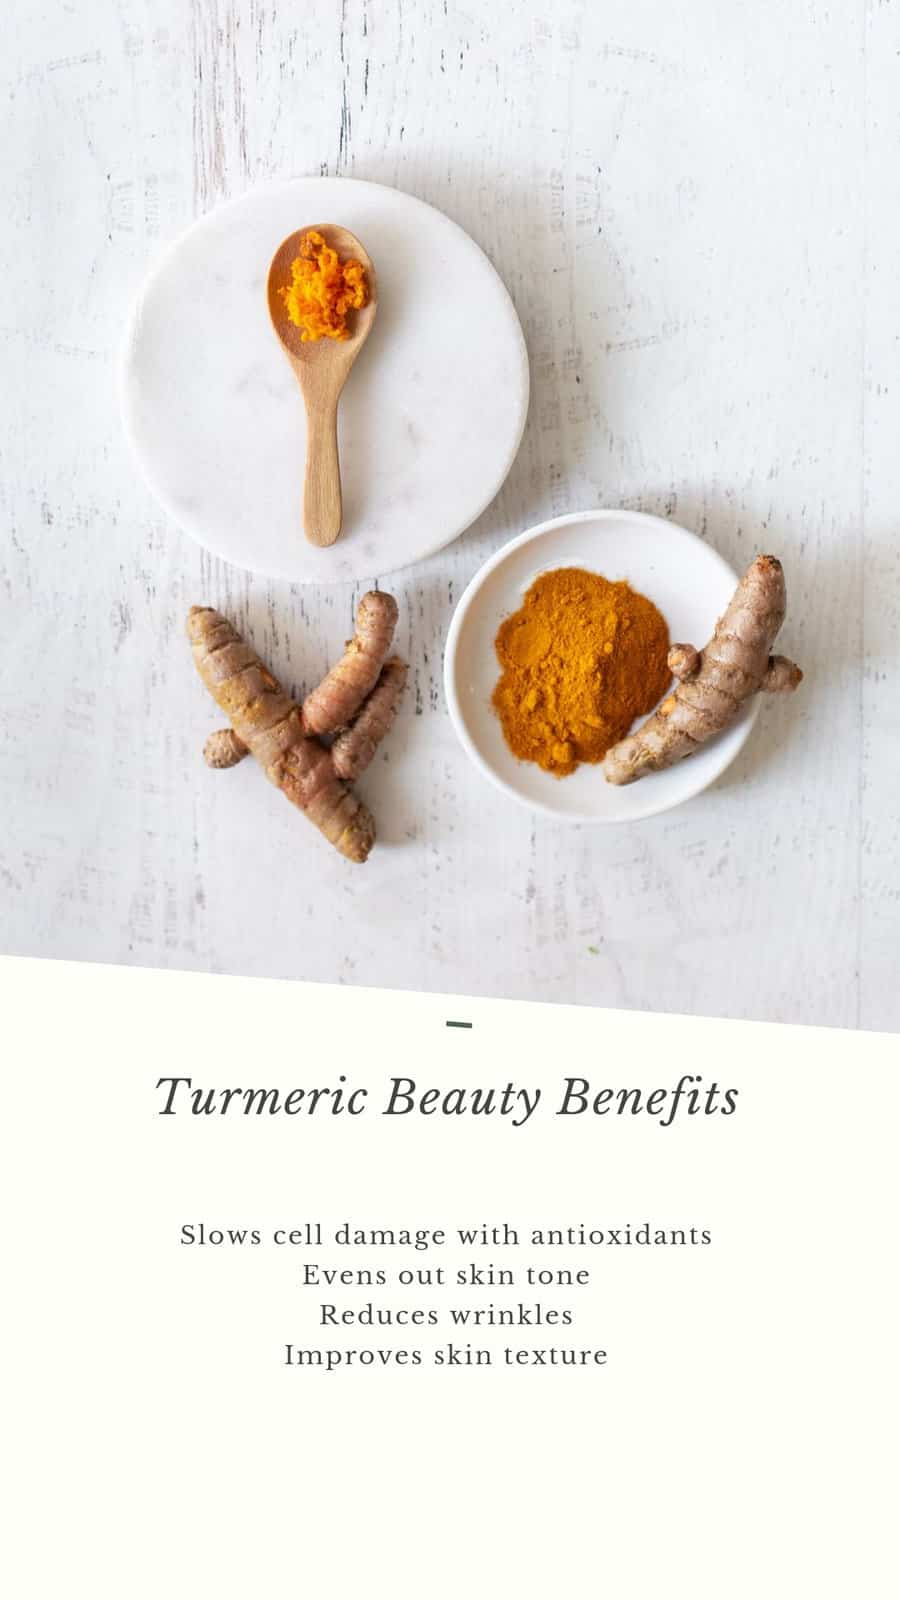 5 Turmeric Benefits For Skin + How To Use It - Hello Glow